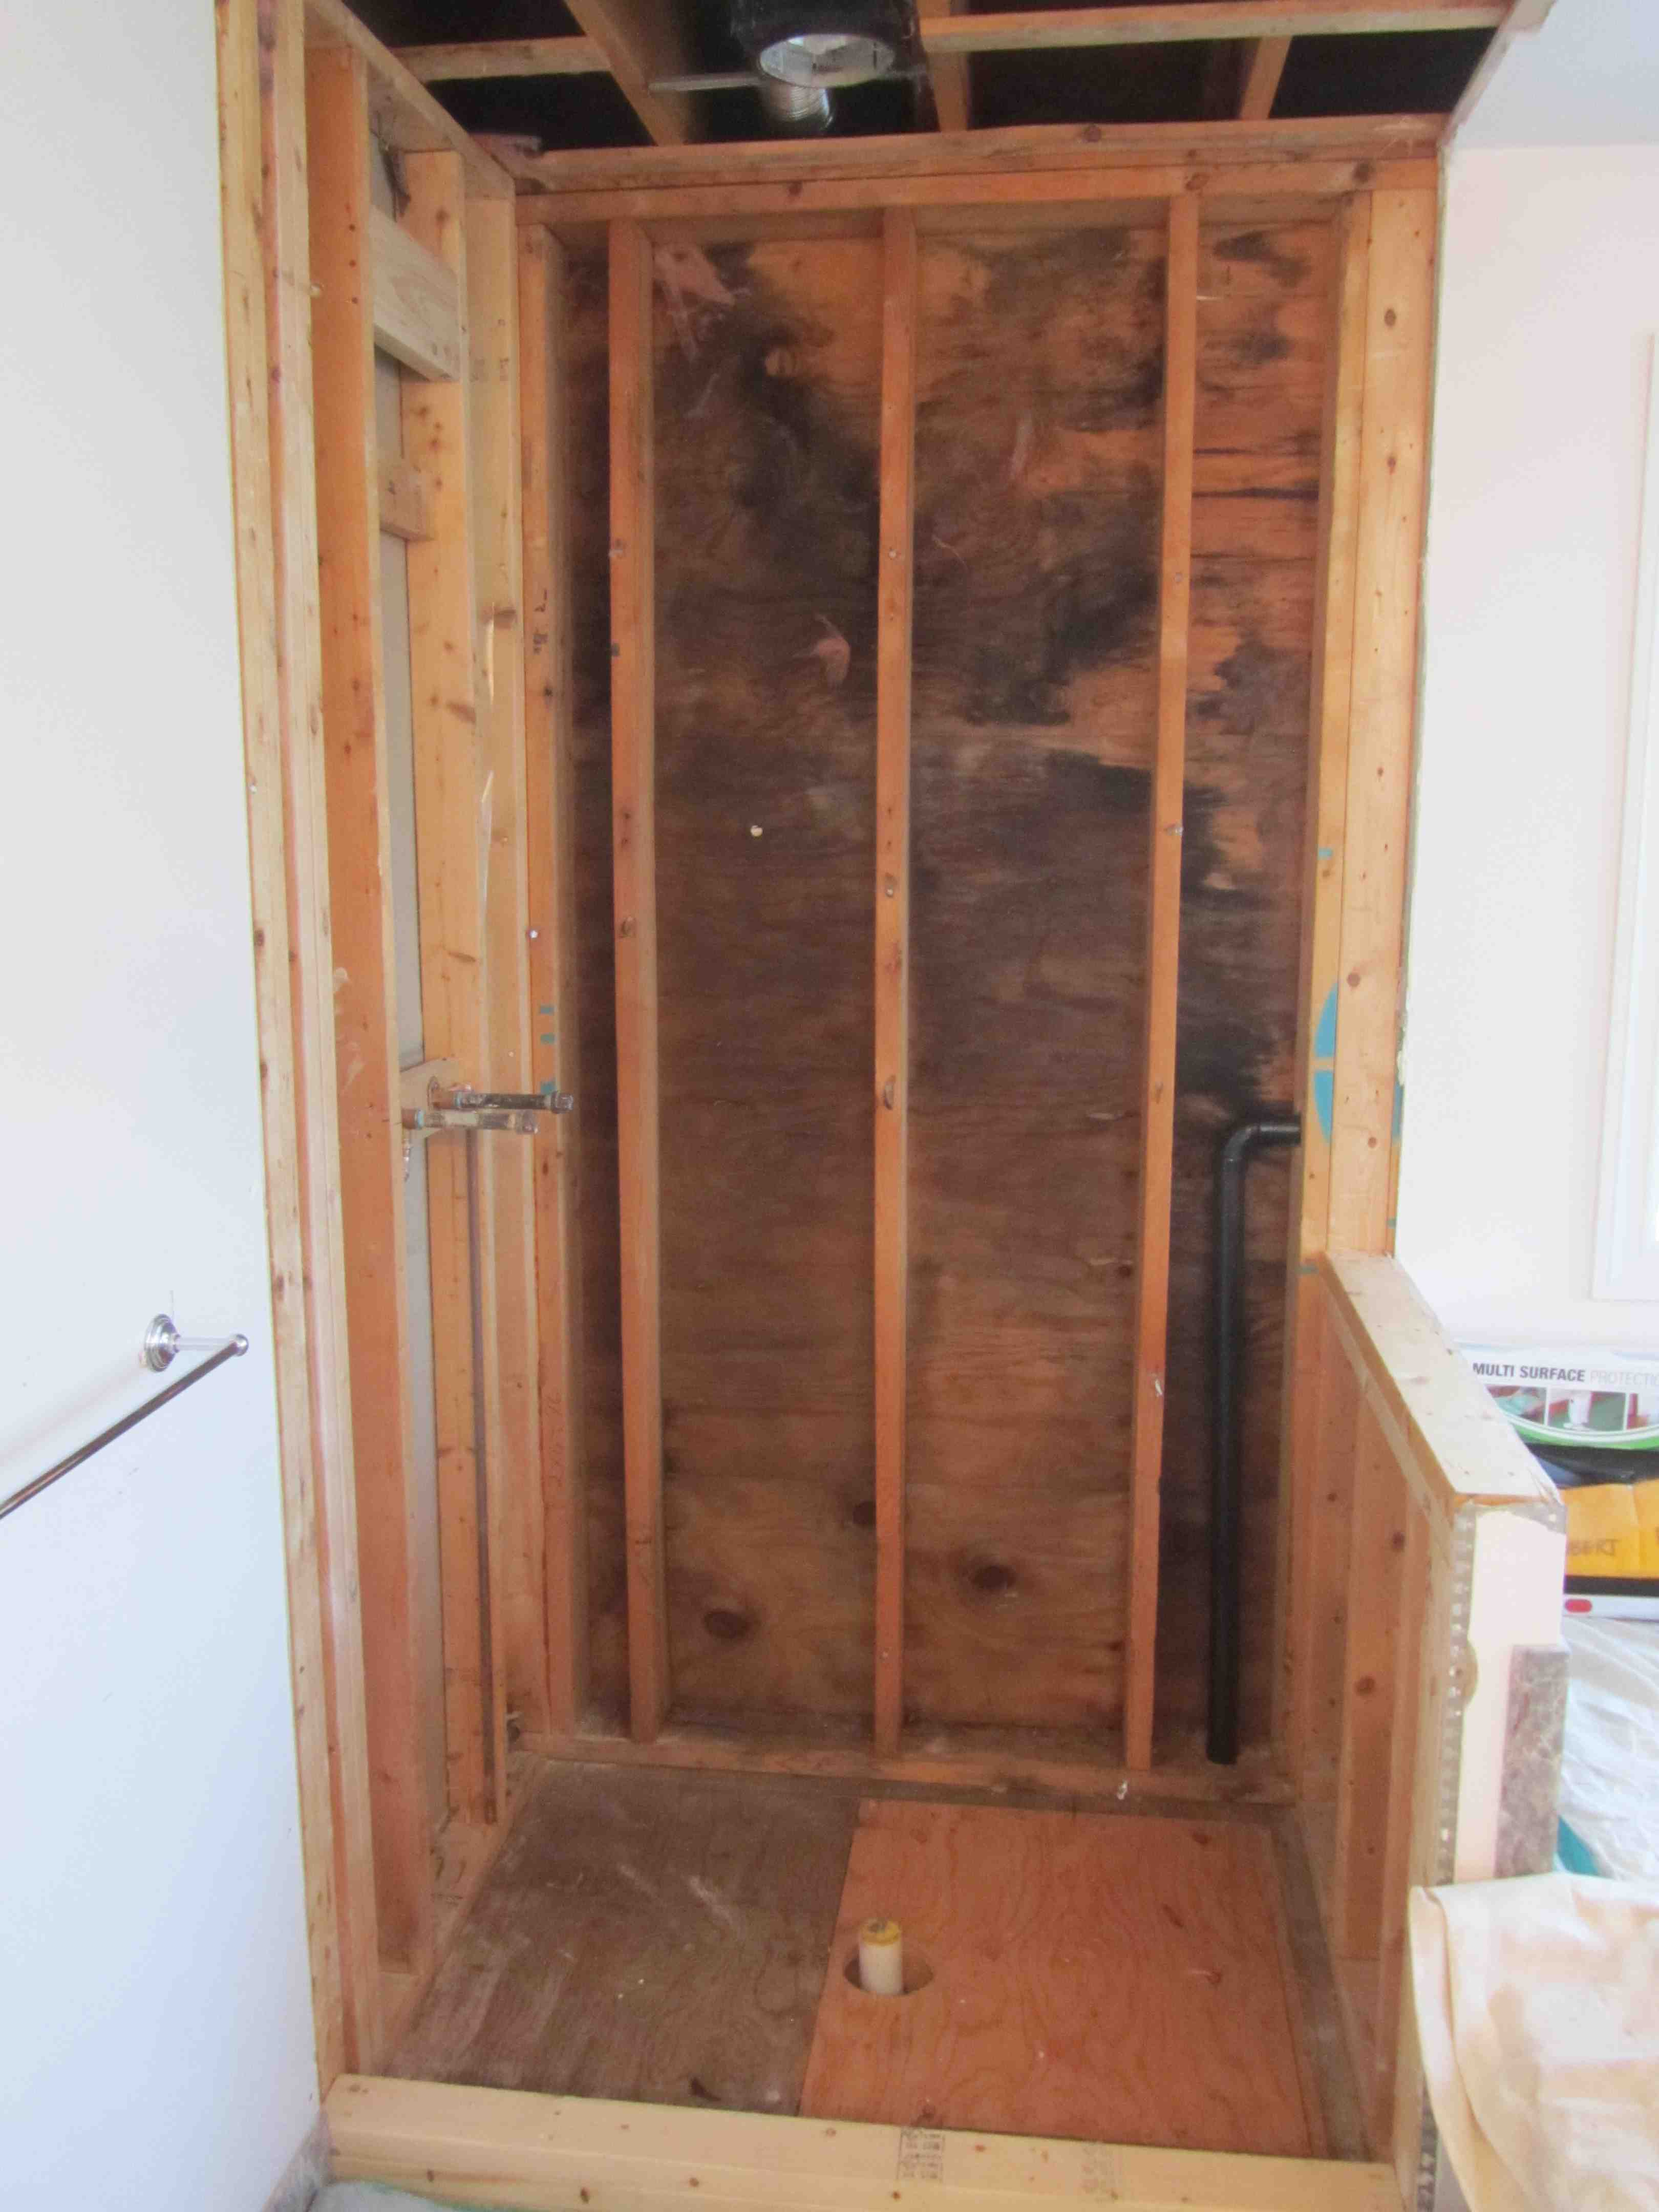 Black Mold Behind Shower Wall Pro Construction Forum Be The Pro inside measurements 3240 X 4320